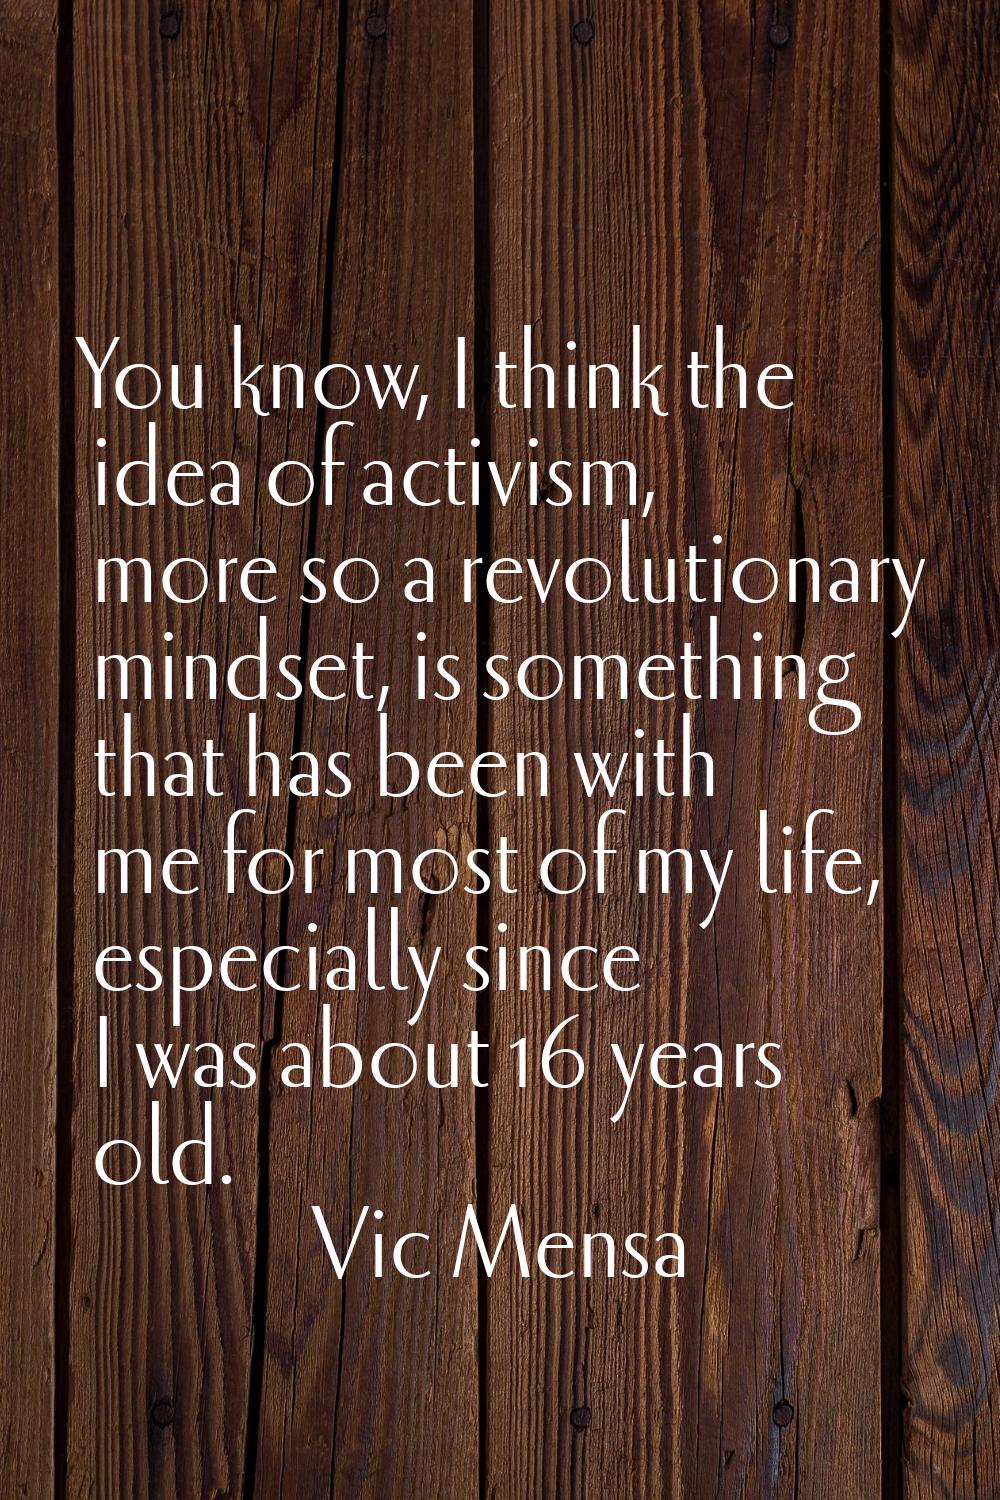 You know, I think the idea of activism, more so a revolutionary mindset, is something that has been